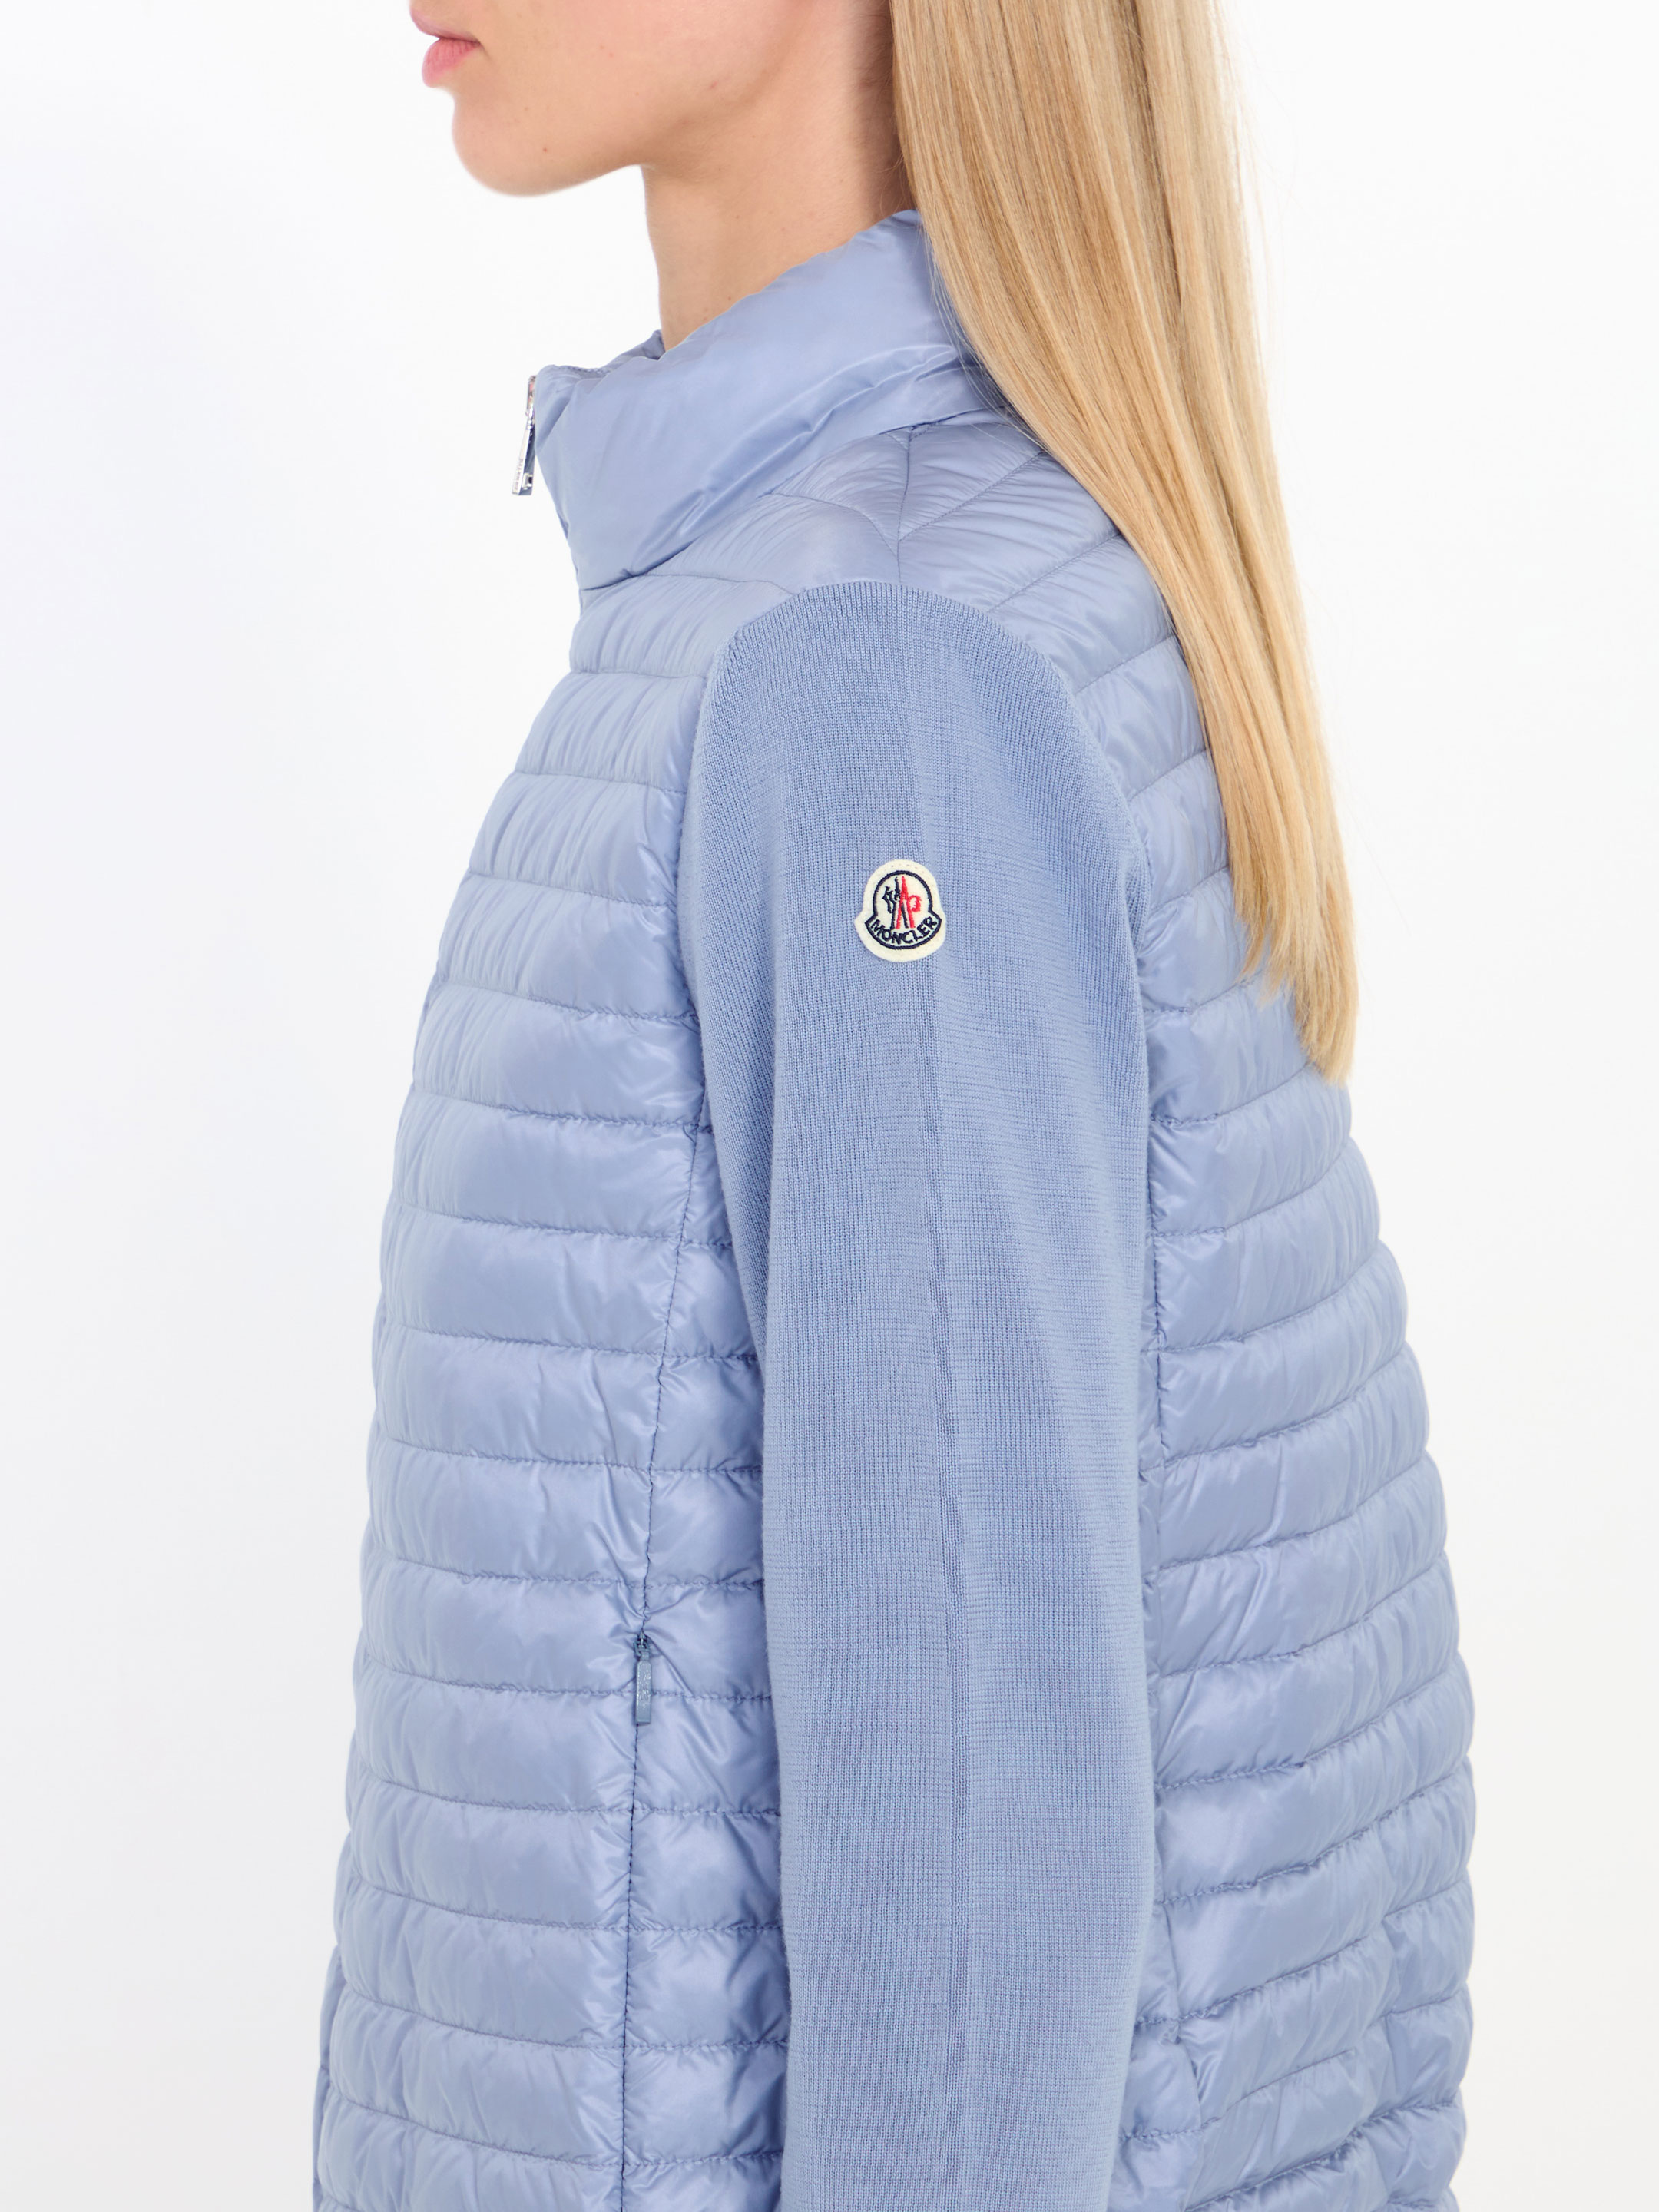 MONCLER - Cardigan tricot | Leam Roma - Luxury Shopping Online